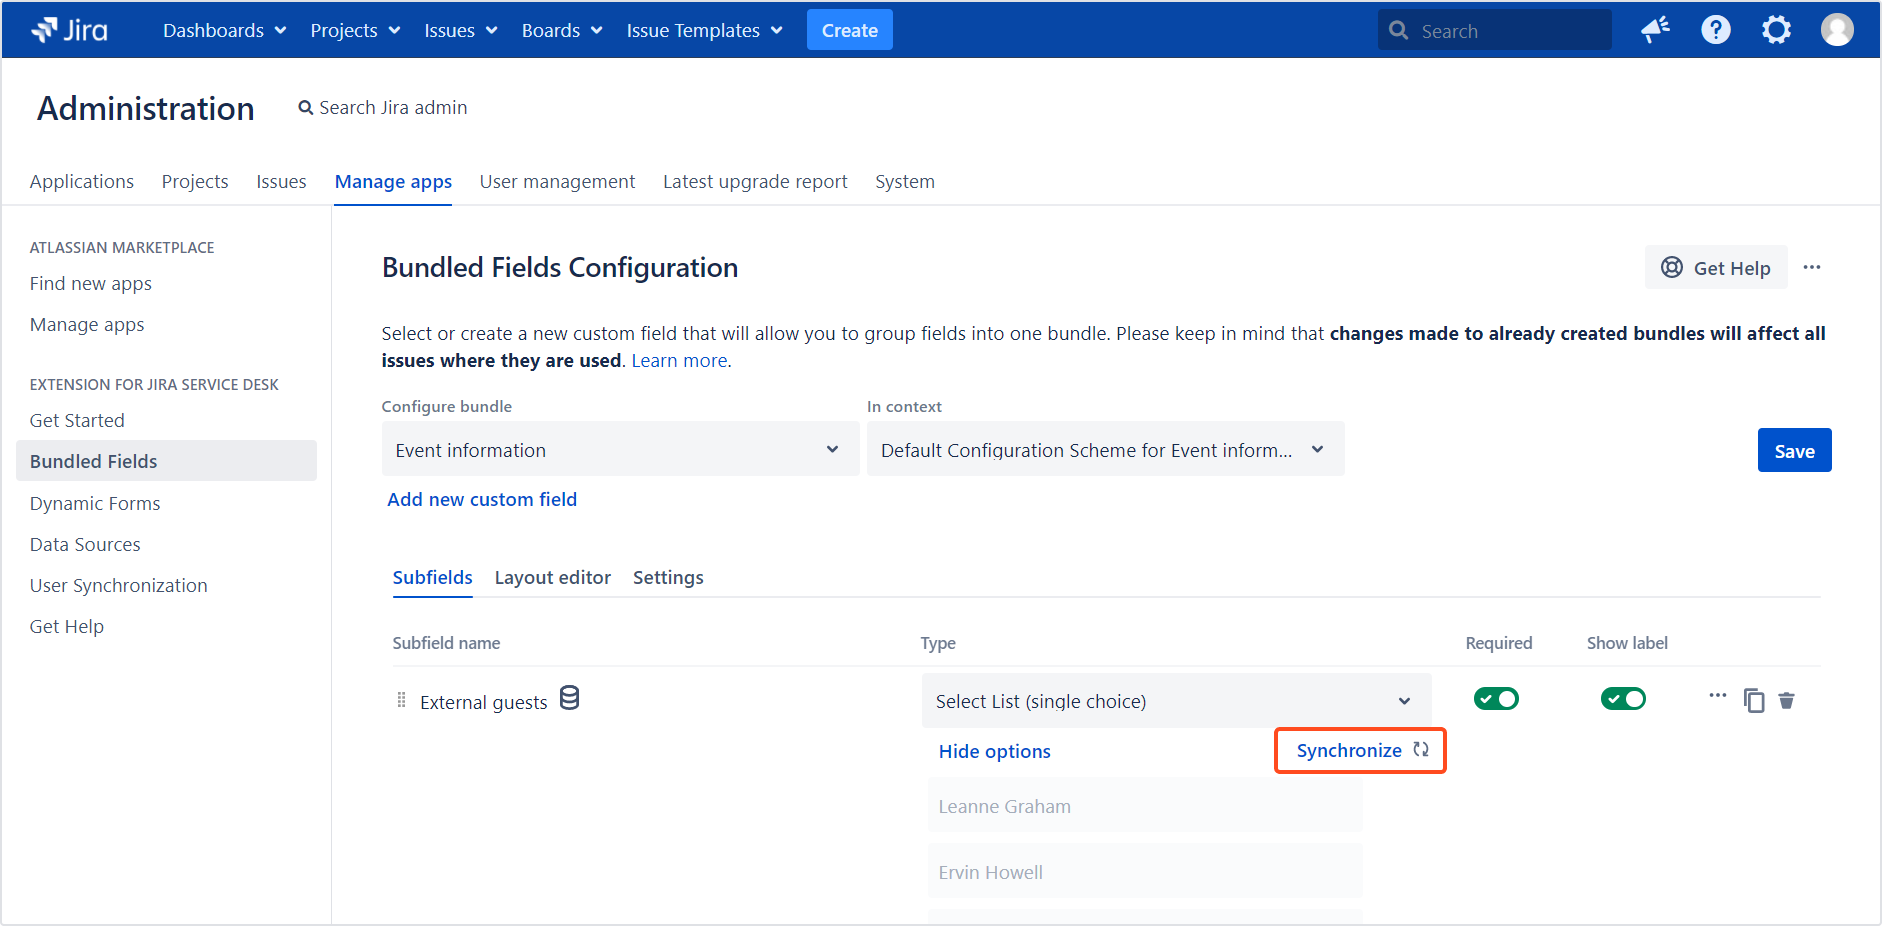 Extension for Jira Service Management - Bundled Fields Data Sources: Manual synchronization of options